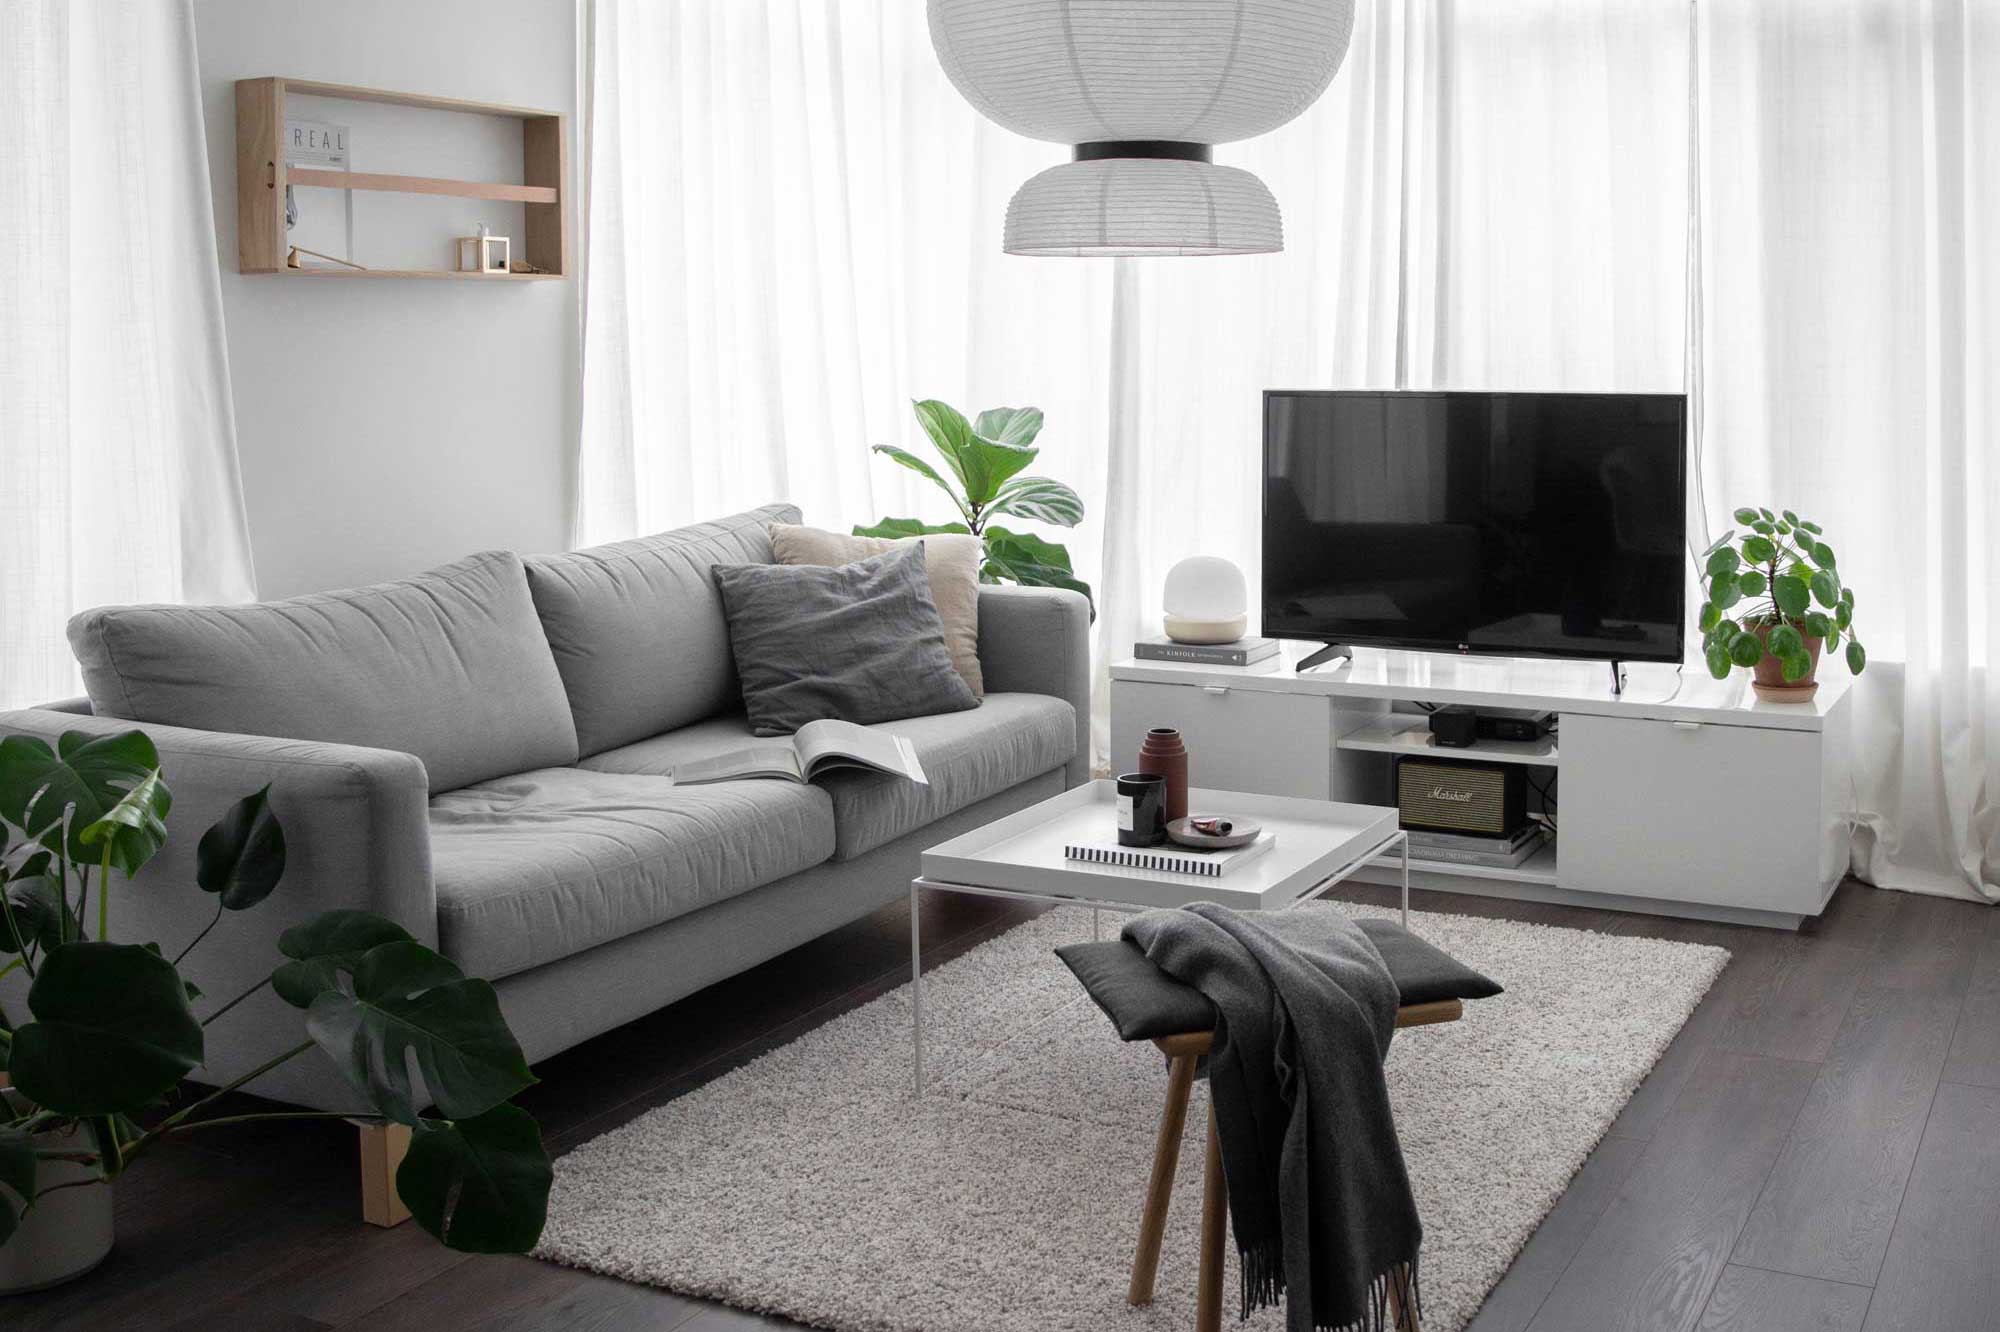 Home tour - a minimalist apartment in Vancouver | These Four Walls blog